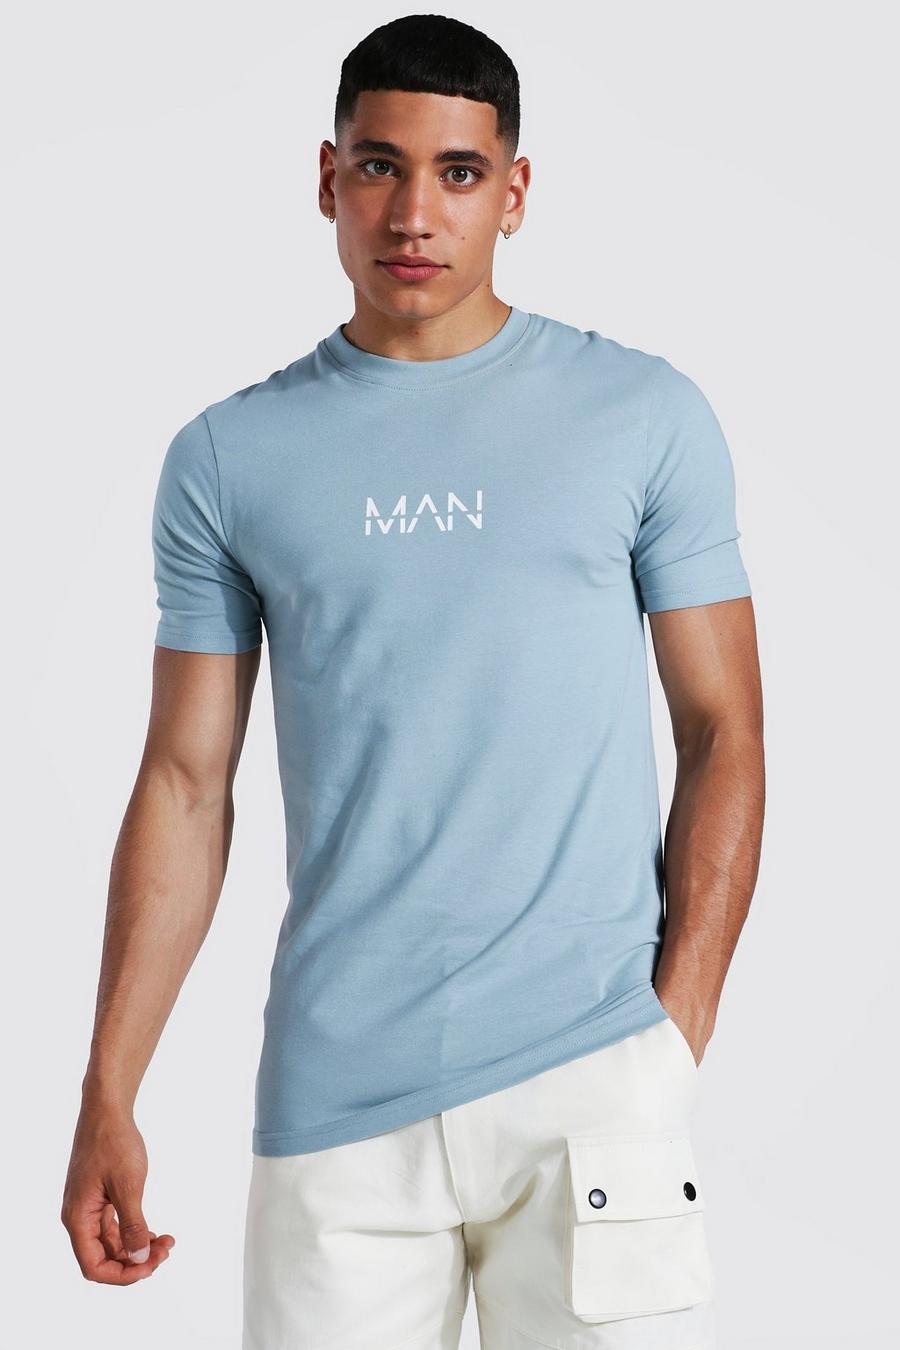 Muscle-Fit Original Man T-Shirt, Dusty blue image number 1